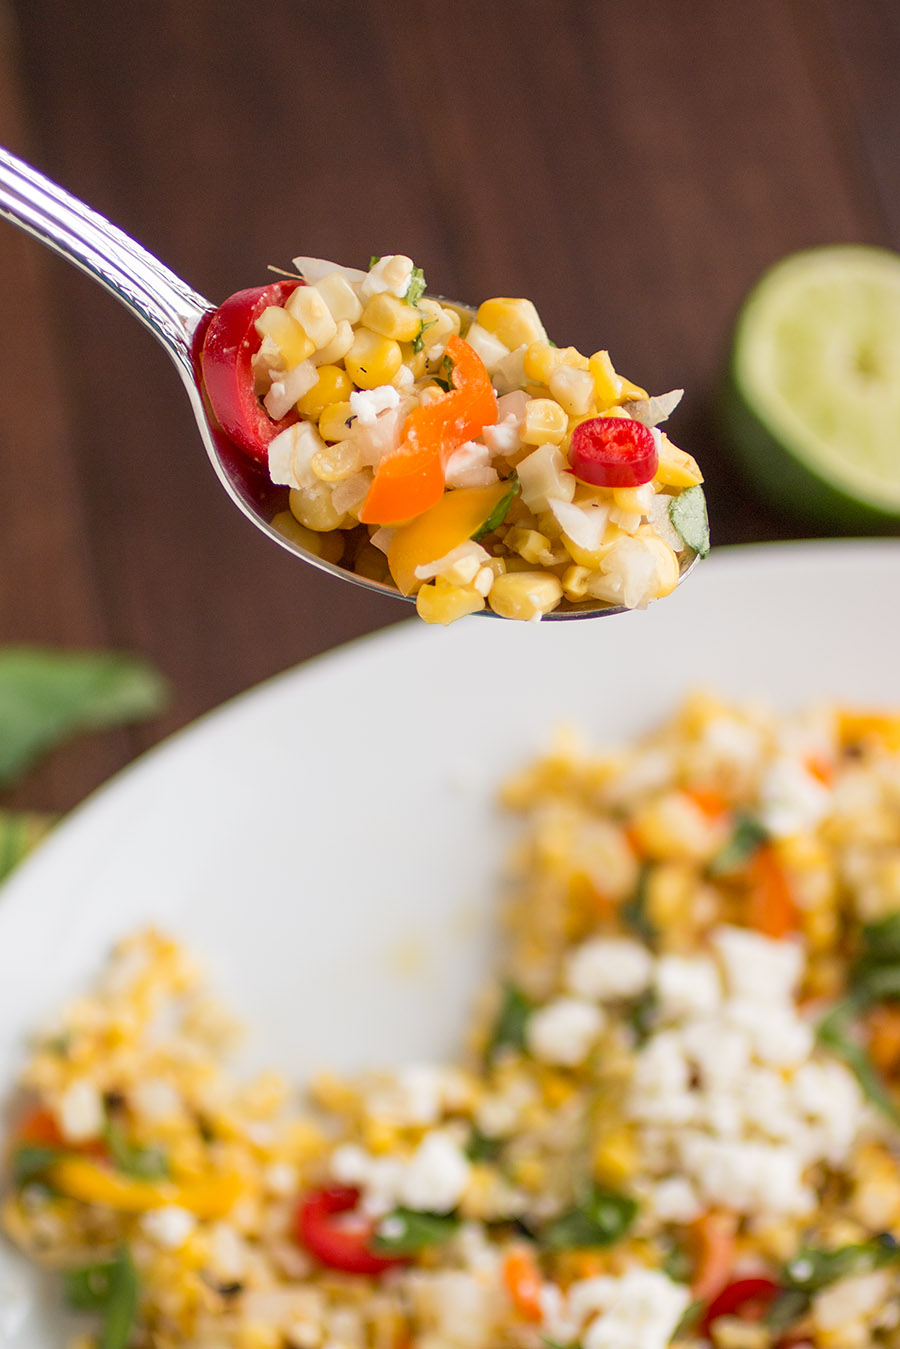 A spoonful of the delicious Grilled Corn Salad with Feta and Sweet Peppers